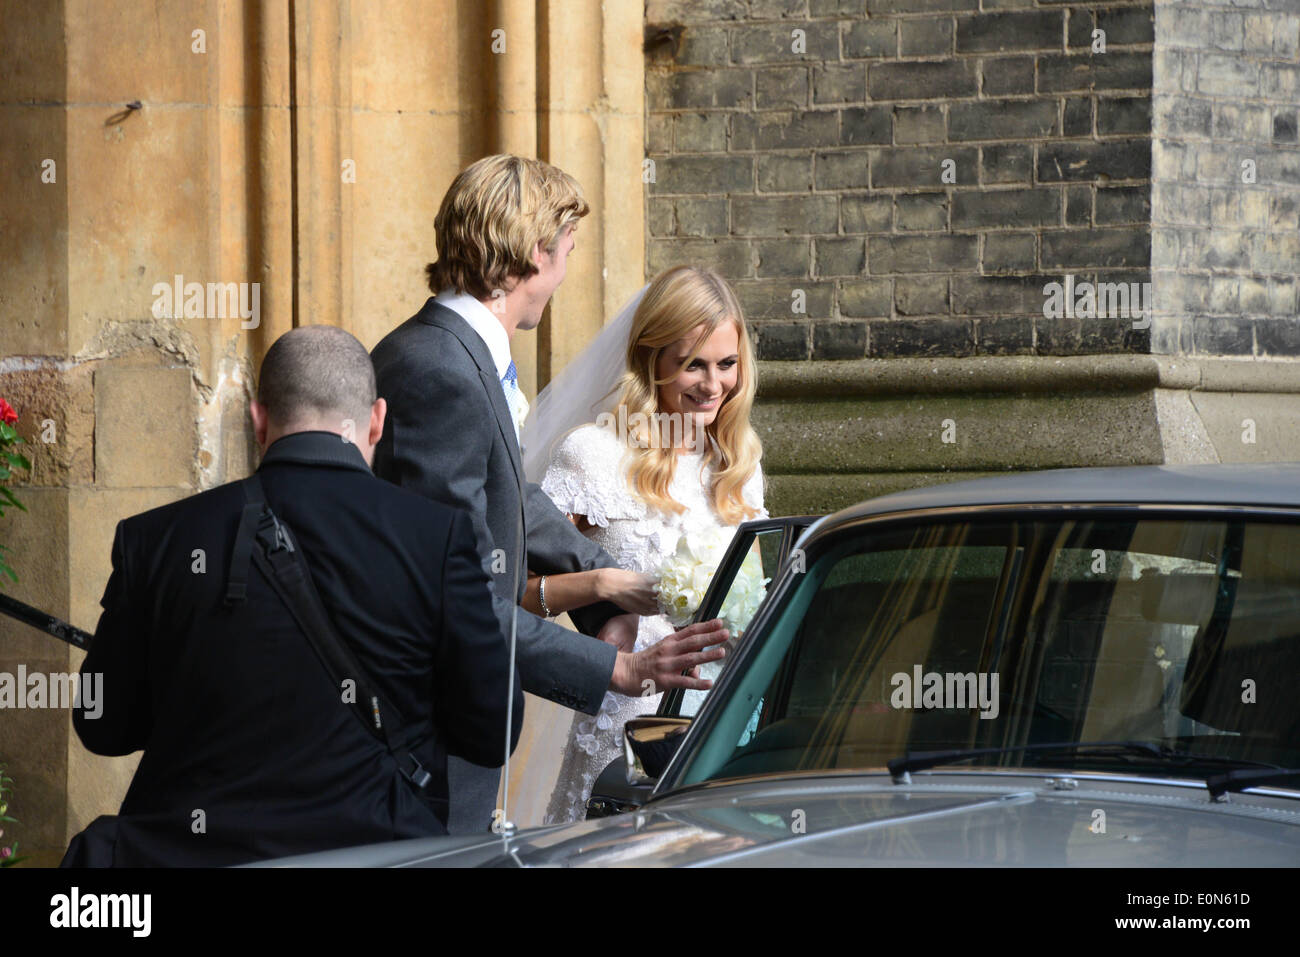 London, UK. 16th May, 2014. Poppy Delevingne and James Cook leaving St Paul's Church at  Knightsbridge after wedding ceremony in London. Photo by See Li/Alamy Live News Stock Photo